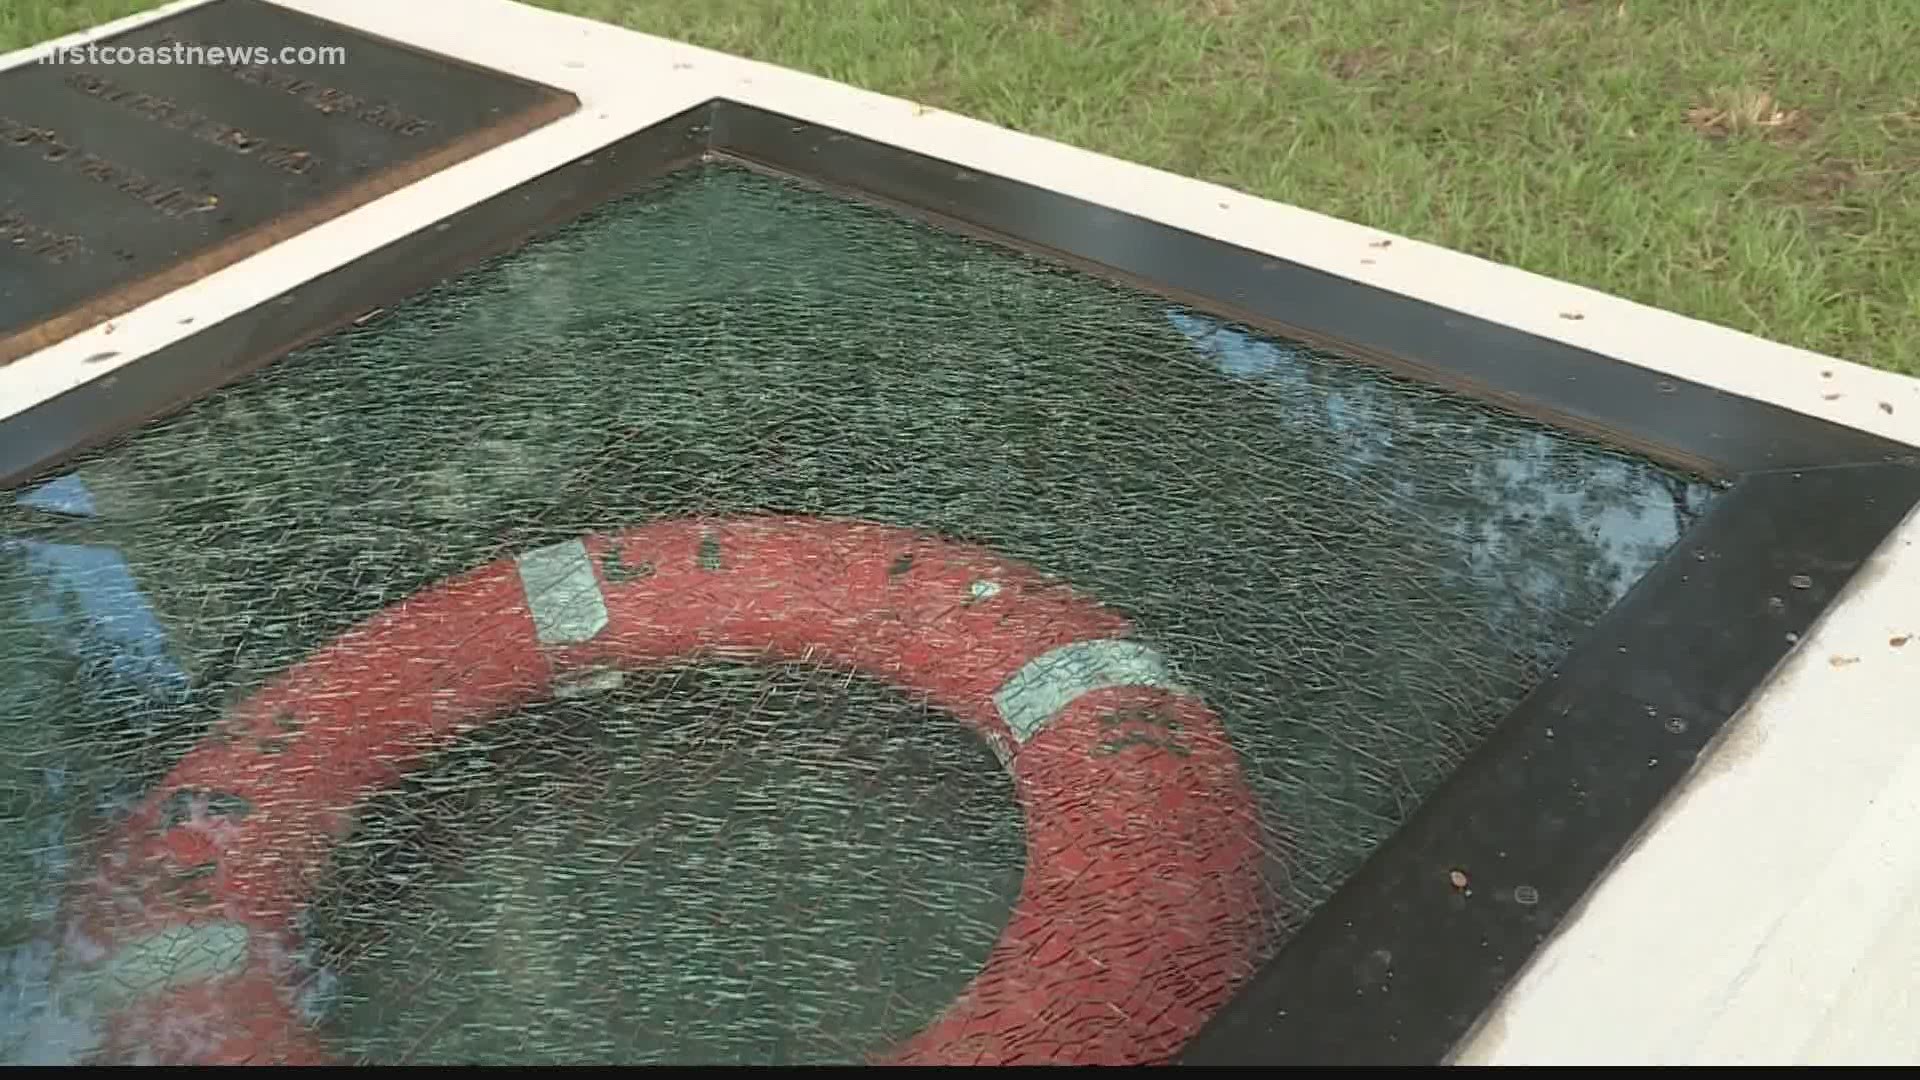 Five years after the SS El Faro sunk off the coast of the Bahamas, the families had to endure more heartbreak when the memorial to the crew was vandalized.